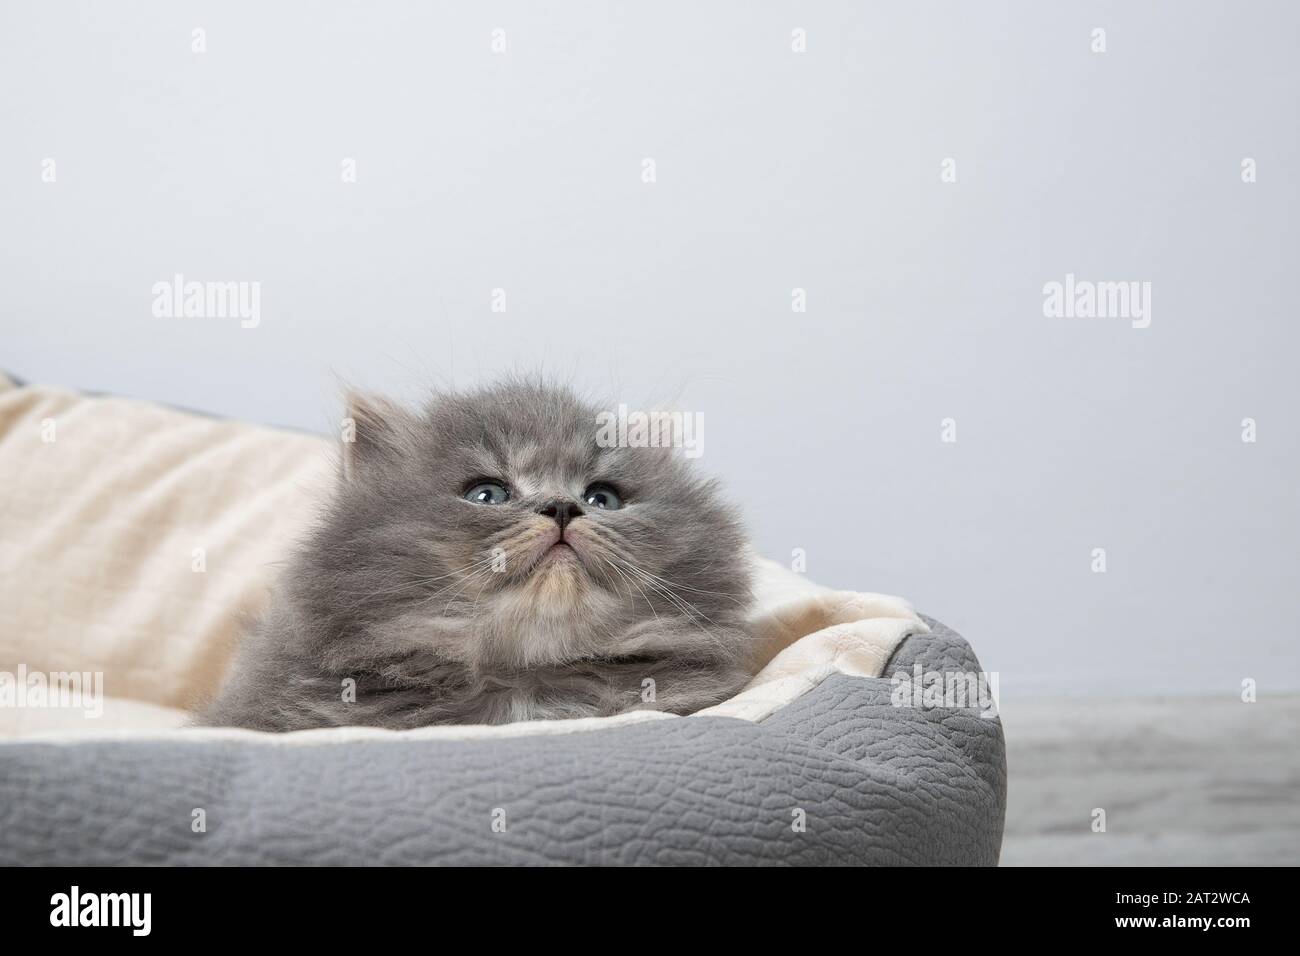 The kitten lies in bed for cats. Stock Photo